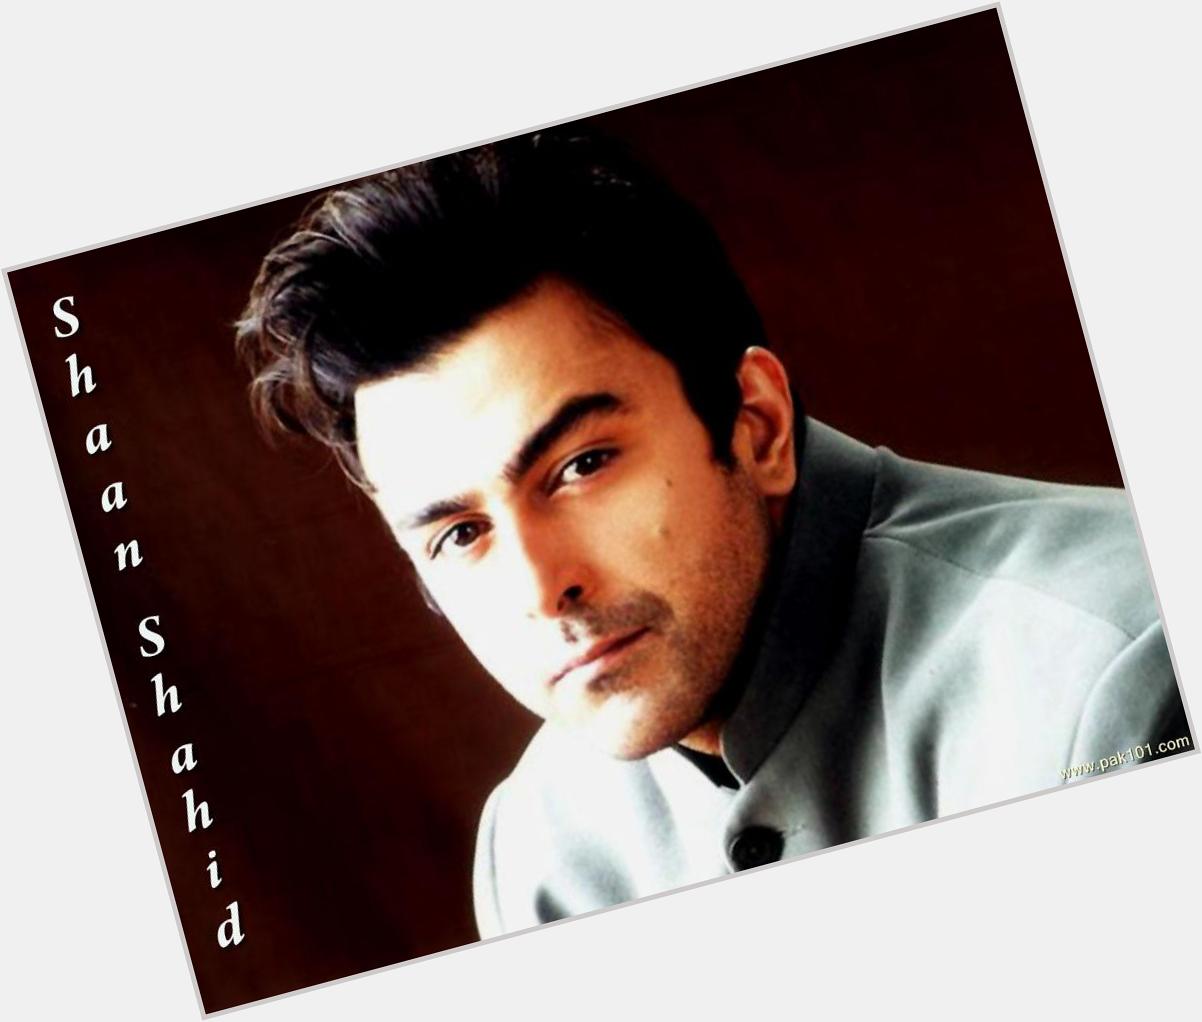 Http://fanpagepress.net/m/S/Shaan Shahid New Pic 1